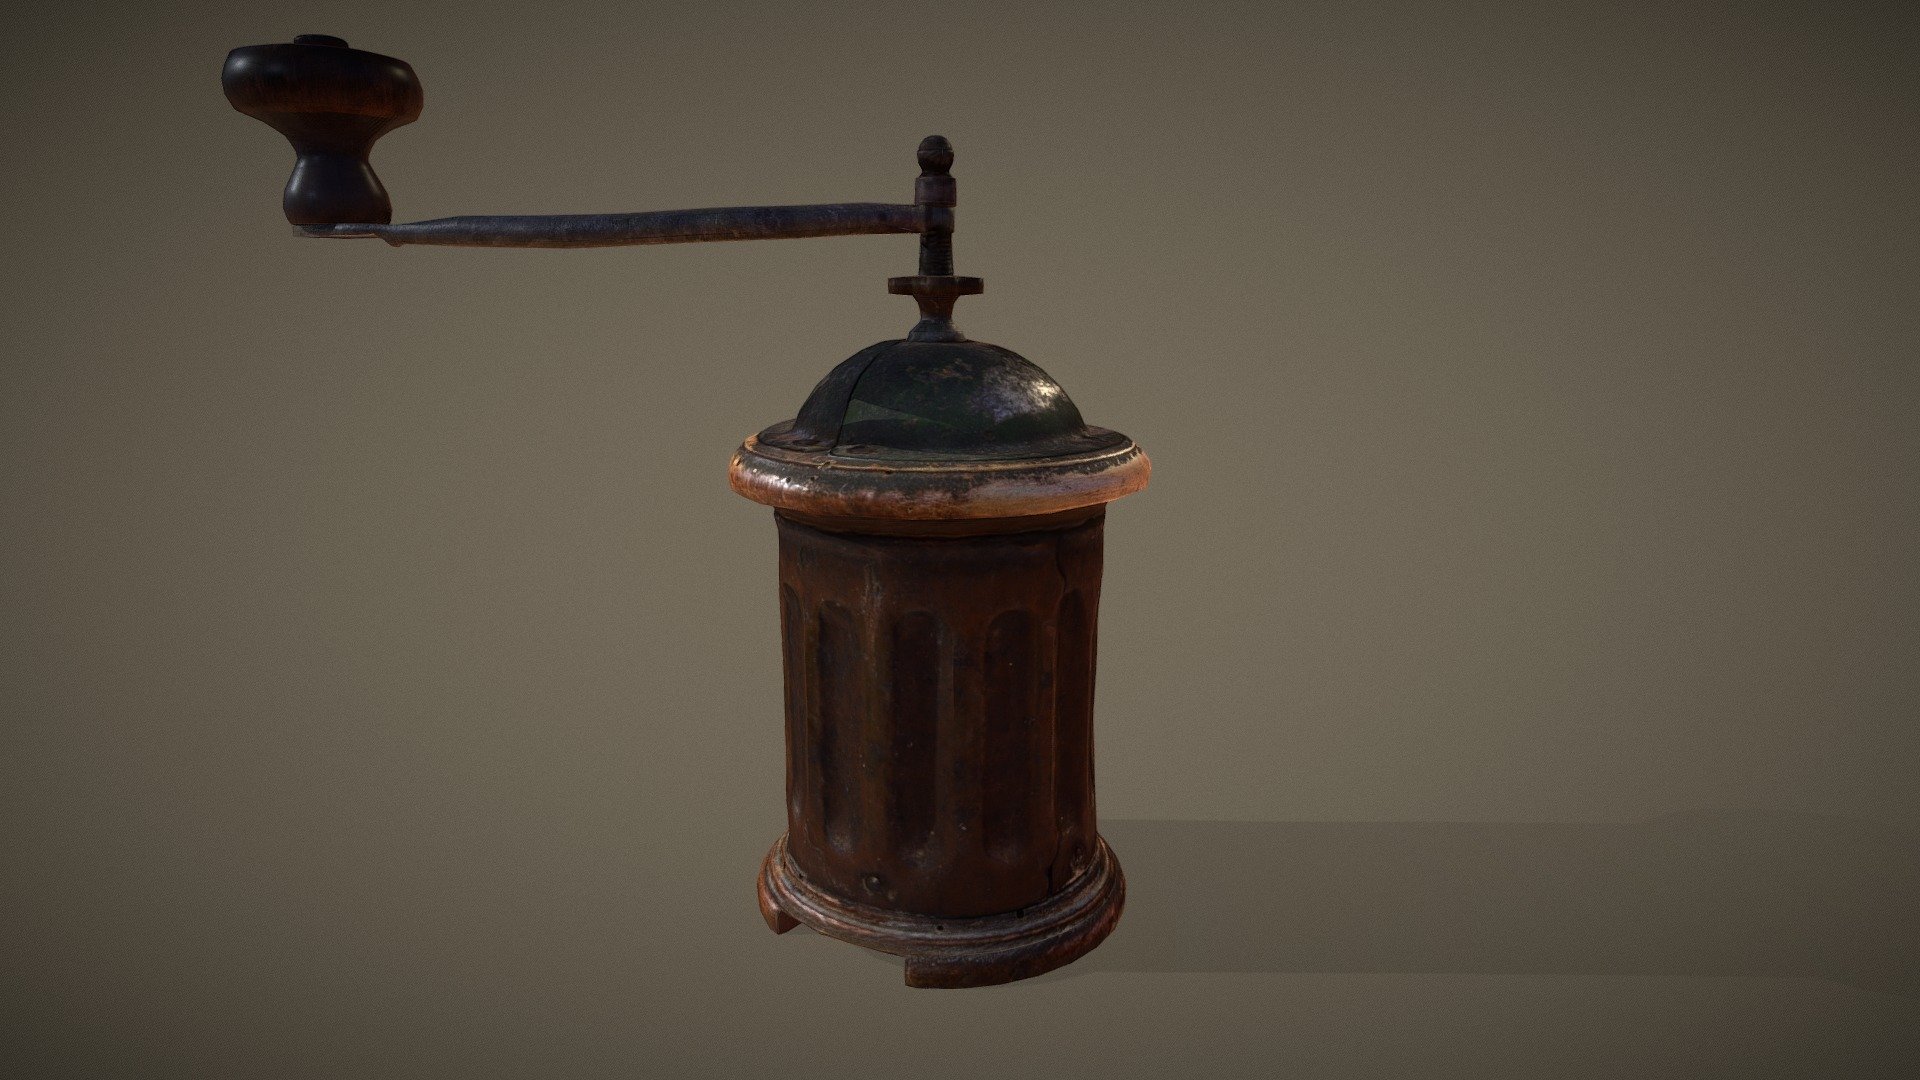 Photogrammetric model of a pepper mill of the early twentieth century. The model has been obtained through meshroom and treated, textured and animated in Blender. The texture combines photogrammetric data with 3d painting.

Modelo fotogramétrico de un molinillo de pimientas de principios de siglo XX. El modelo ha sido obtenido mediante meshroom y tratado, texturizado y animado en blender. La textura combina datos fotogramétricos con 3d painting 3d model